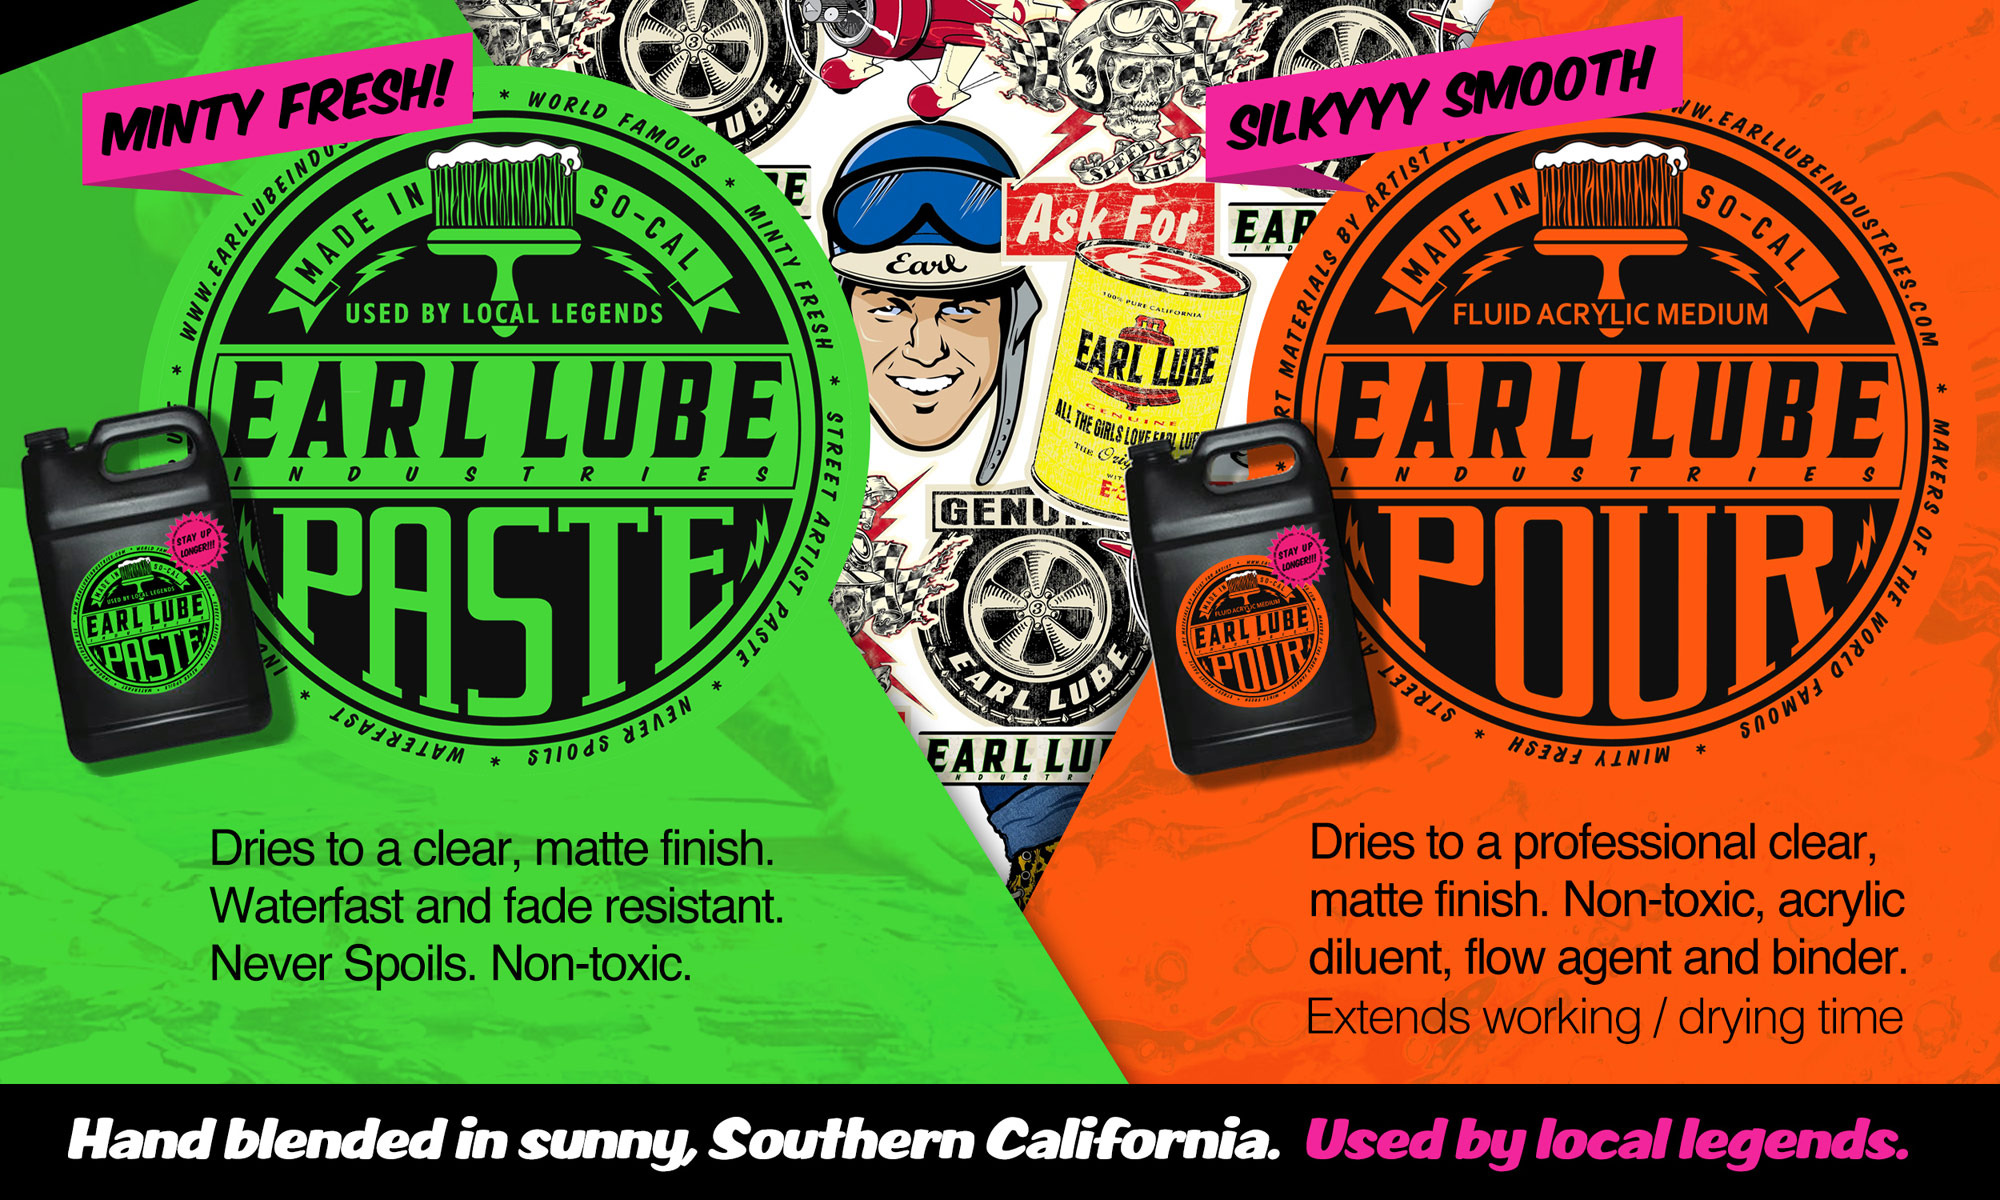 Minty Fresh! Earl Lube Paste. Dries to a clear, matte finish. Waterfast and fade resistant. Never spoils. Non-toxic. Silky smooth! Earl Lube Pour. Dries to a professional clear matte finish. Non-toxic, acrylic diluent, flow agent and binder. Extends working and drying time. Hand blended in sunny Southern California. Used by local legends.